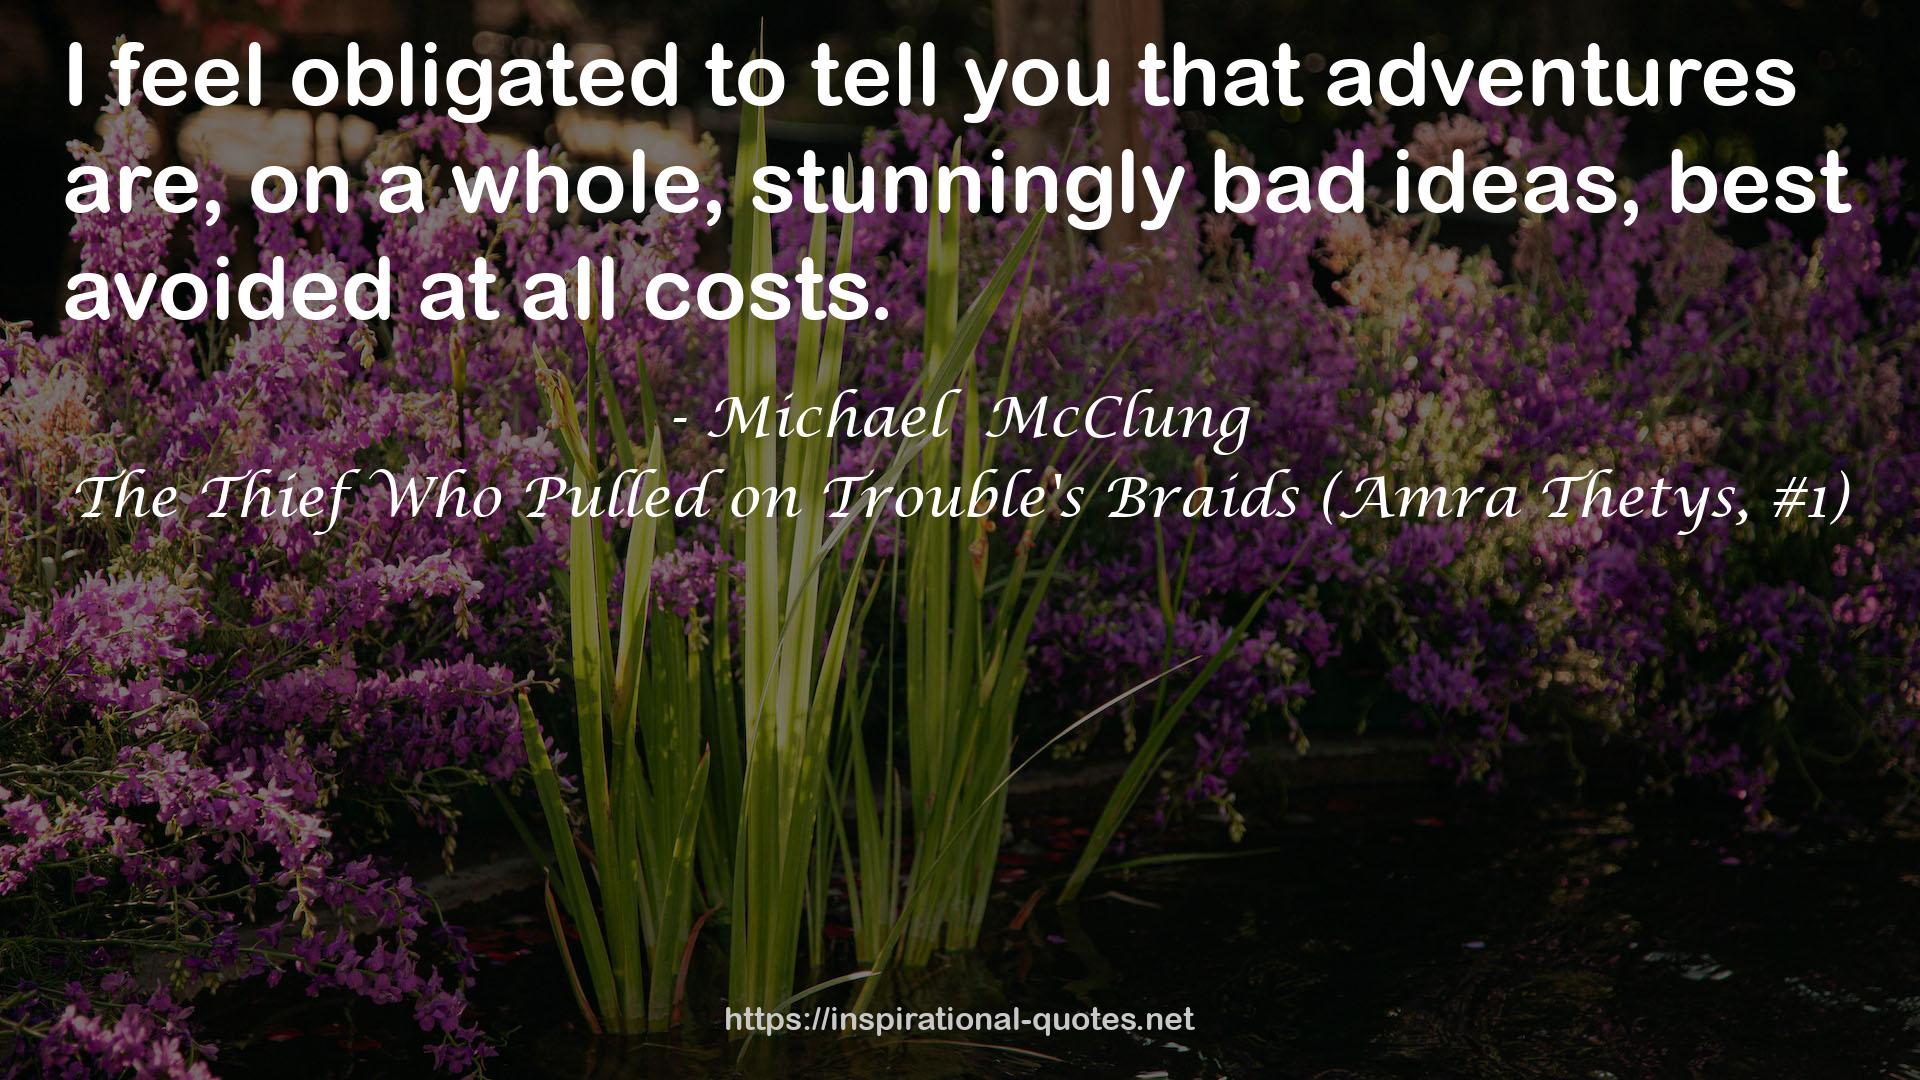 Michael  McClung QUOTES